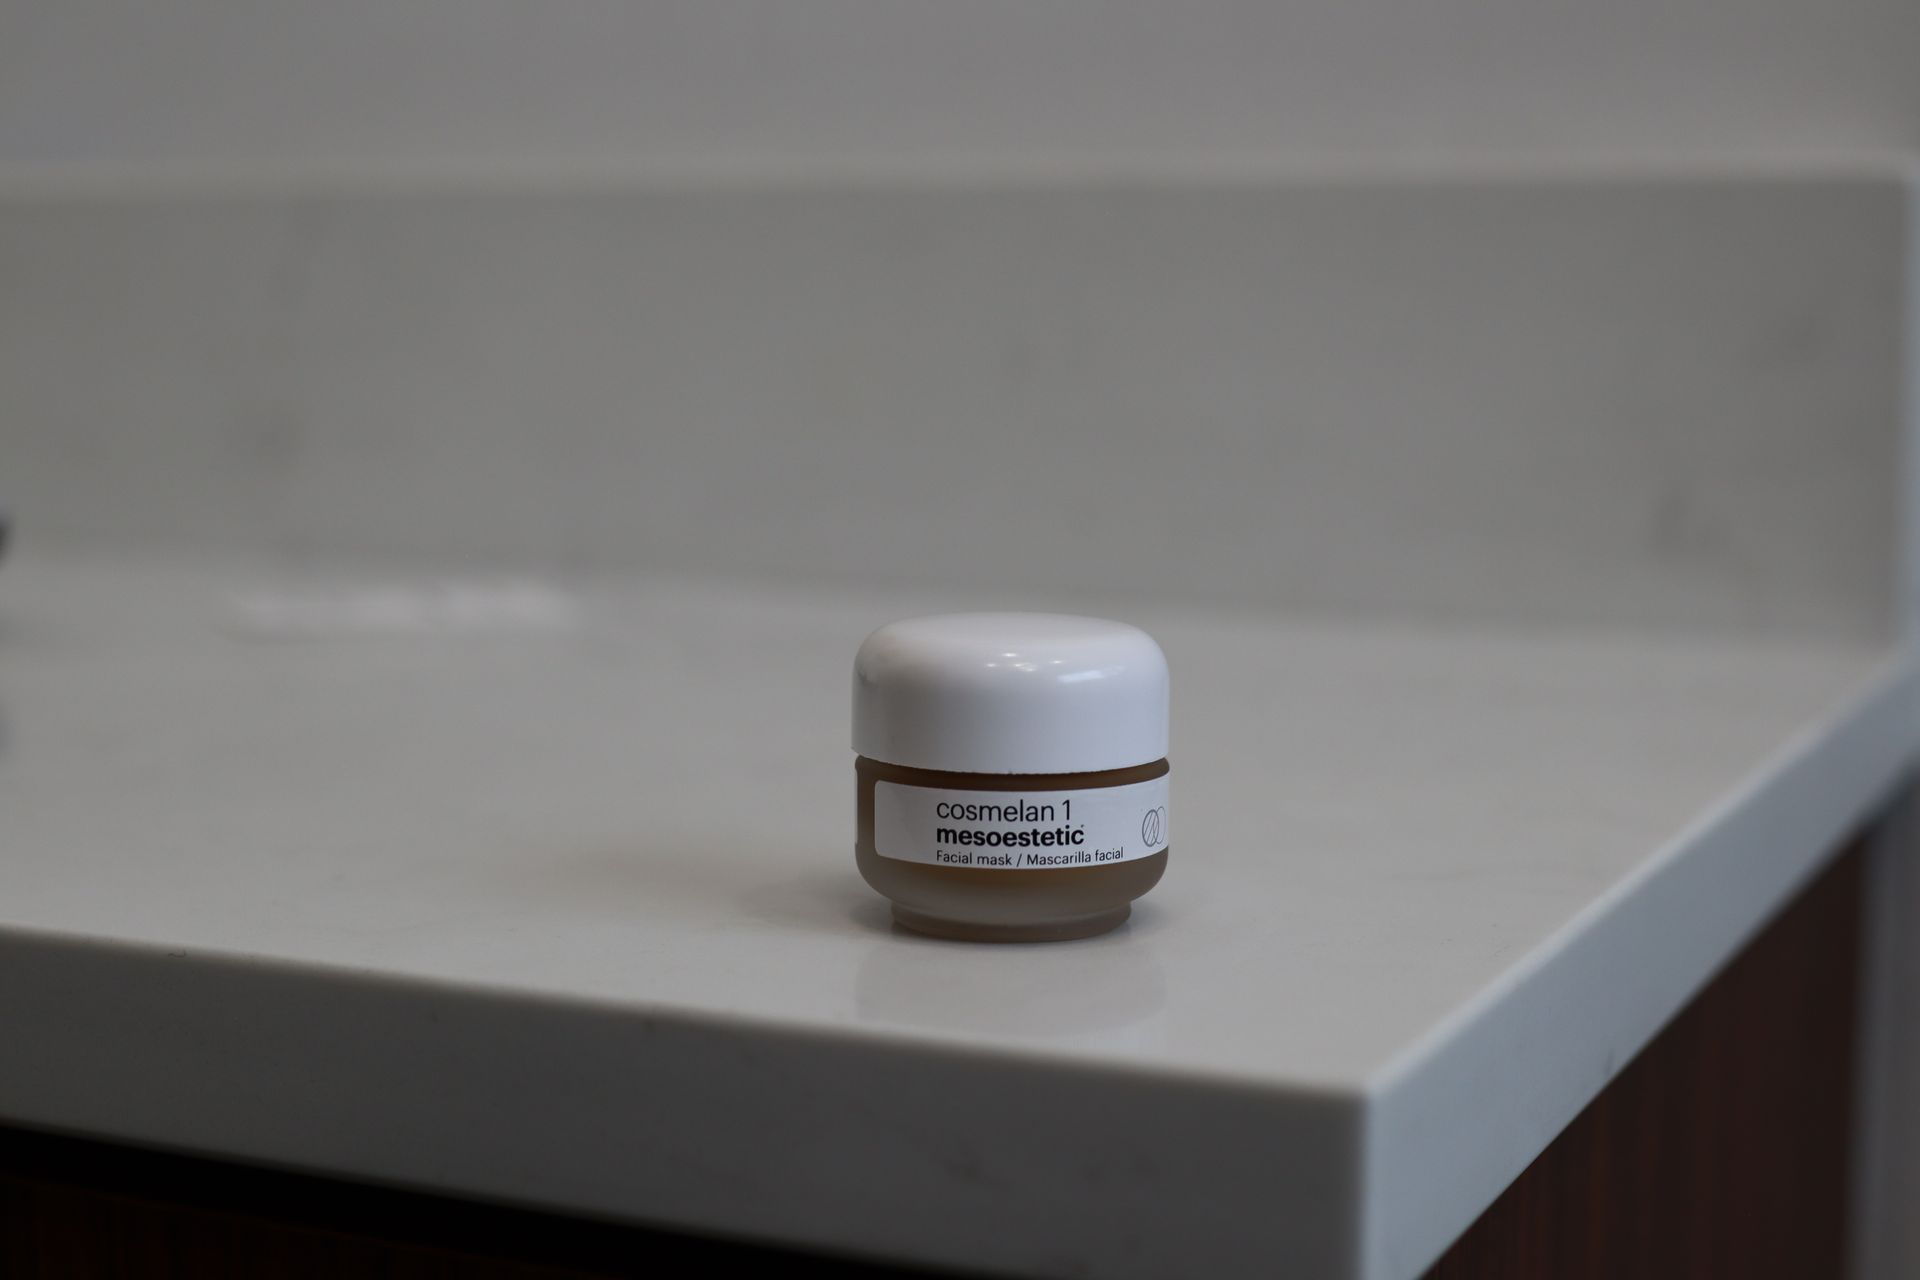 Image of a Cosmelan peel container, showcasing the signature packaging of the leading depigmentation